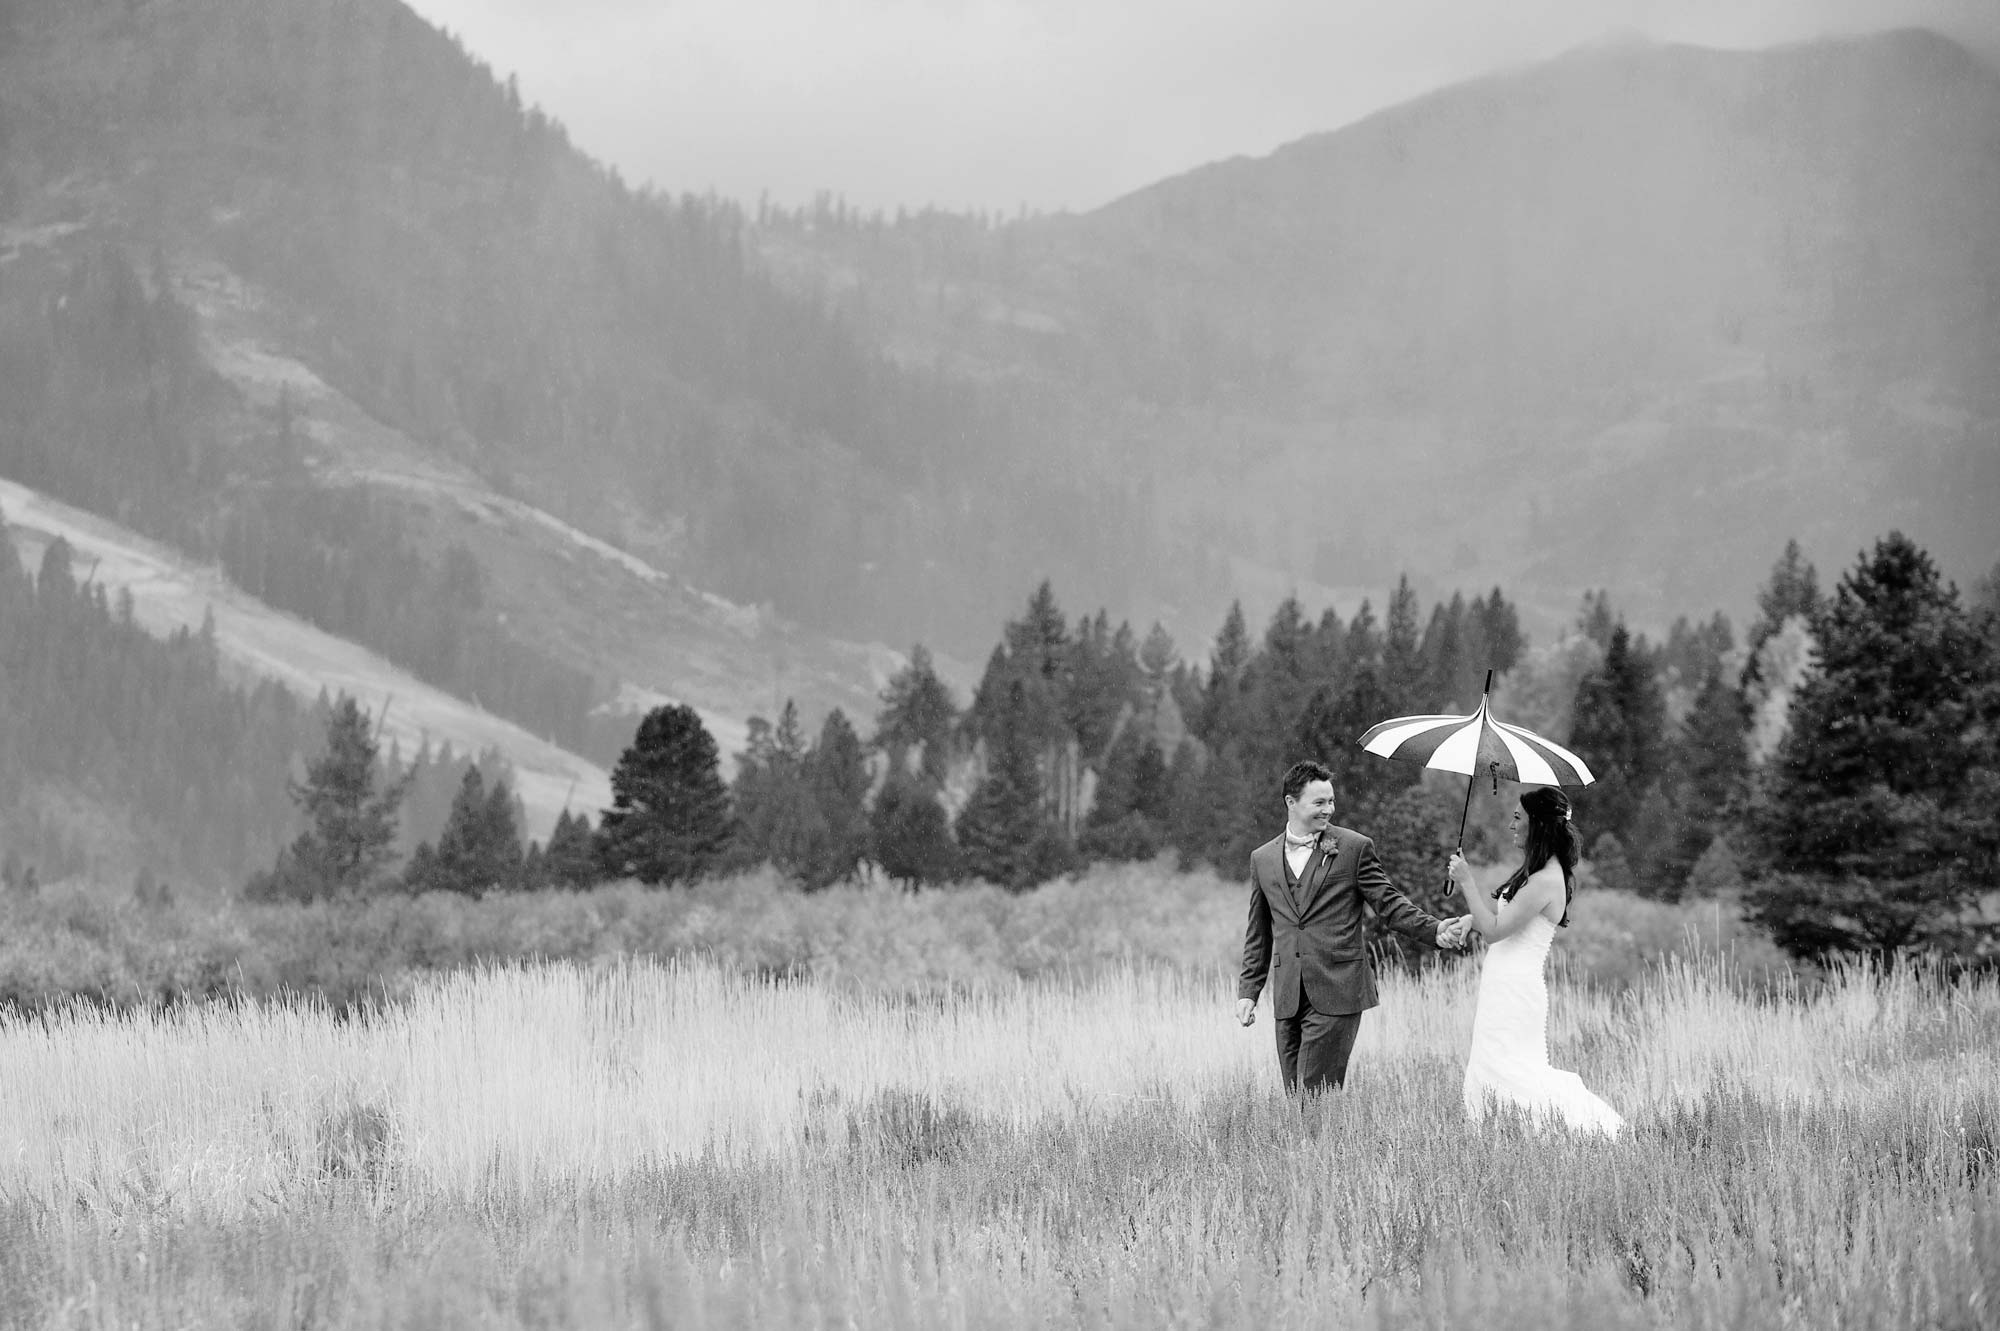 Squaw Valley, California wedding photography at the Resort at Squaw Creek. Picture of a bride and groom walking through the valley in a rainstorm taken by Photography by Monique, Lake Tahoe wedding photographer.